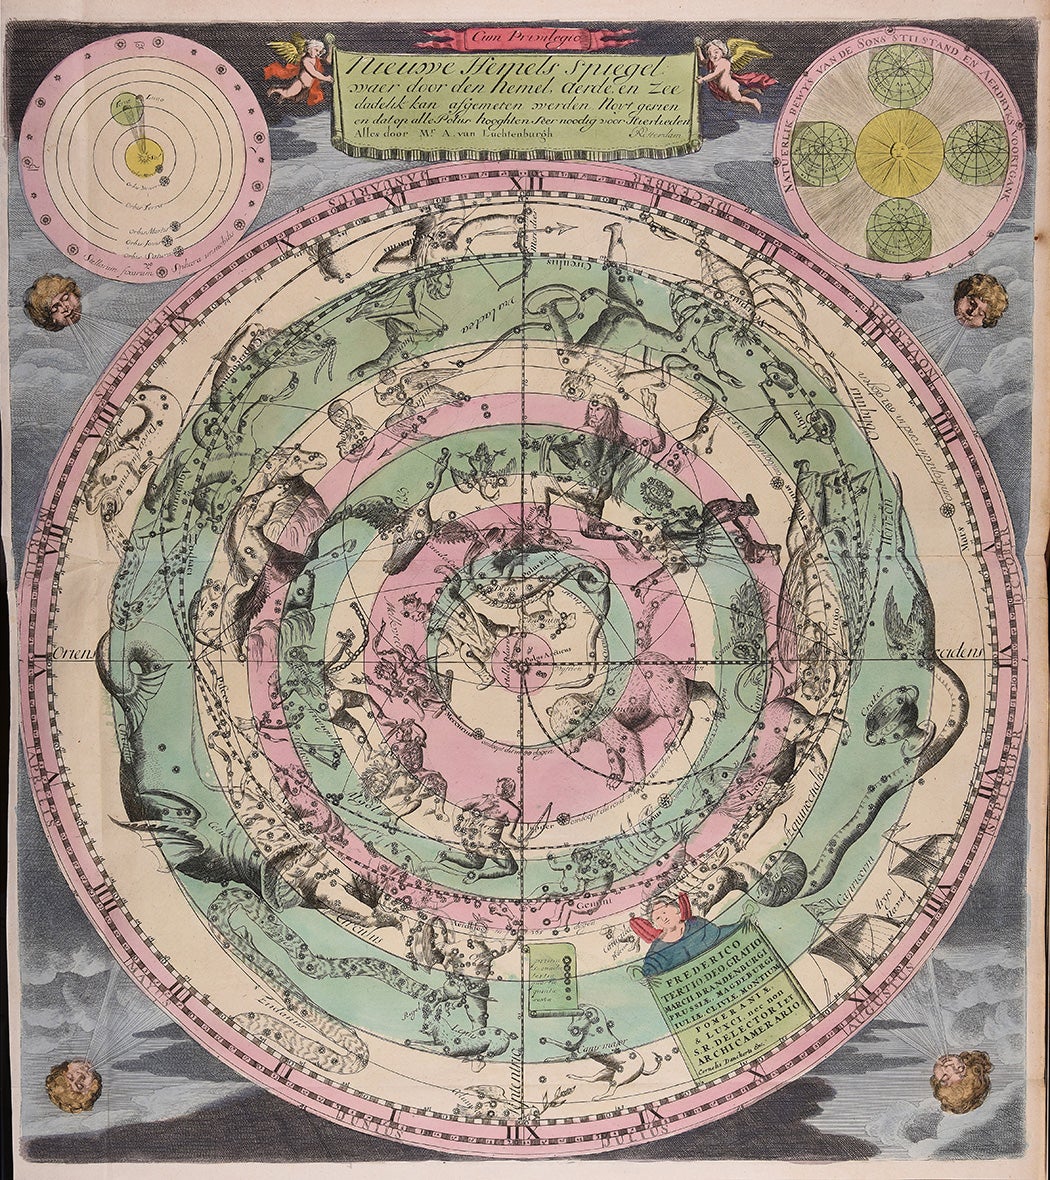 A celestial map from between 1696 and 1717